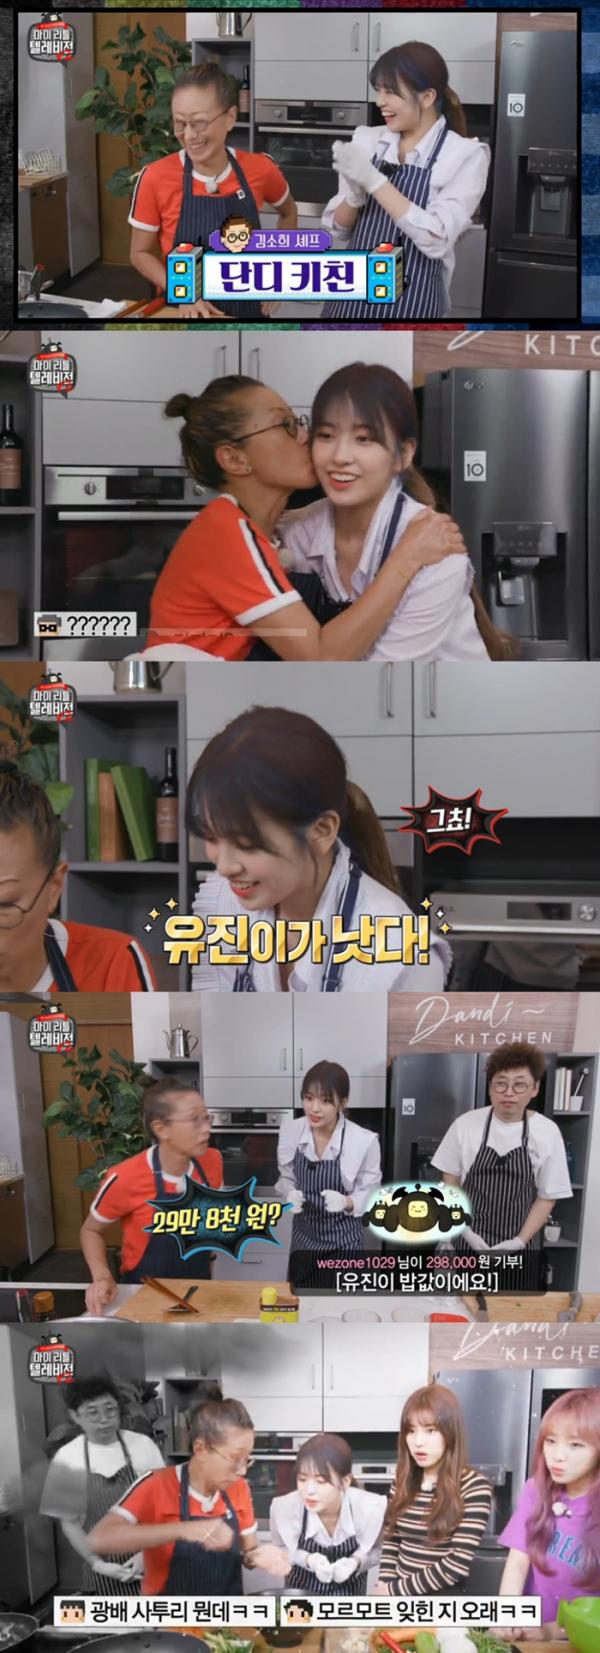 Following the broadcast, Ahn Yu-jin told her chef that she was good at cooking.